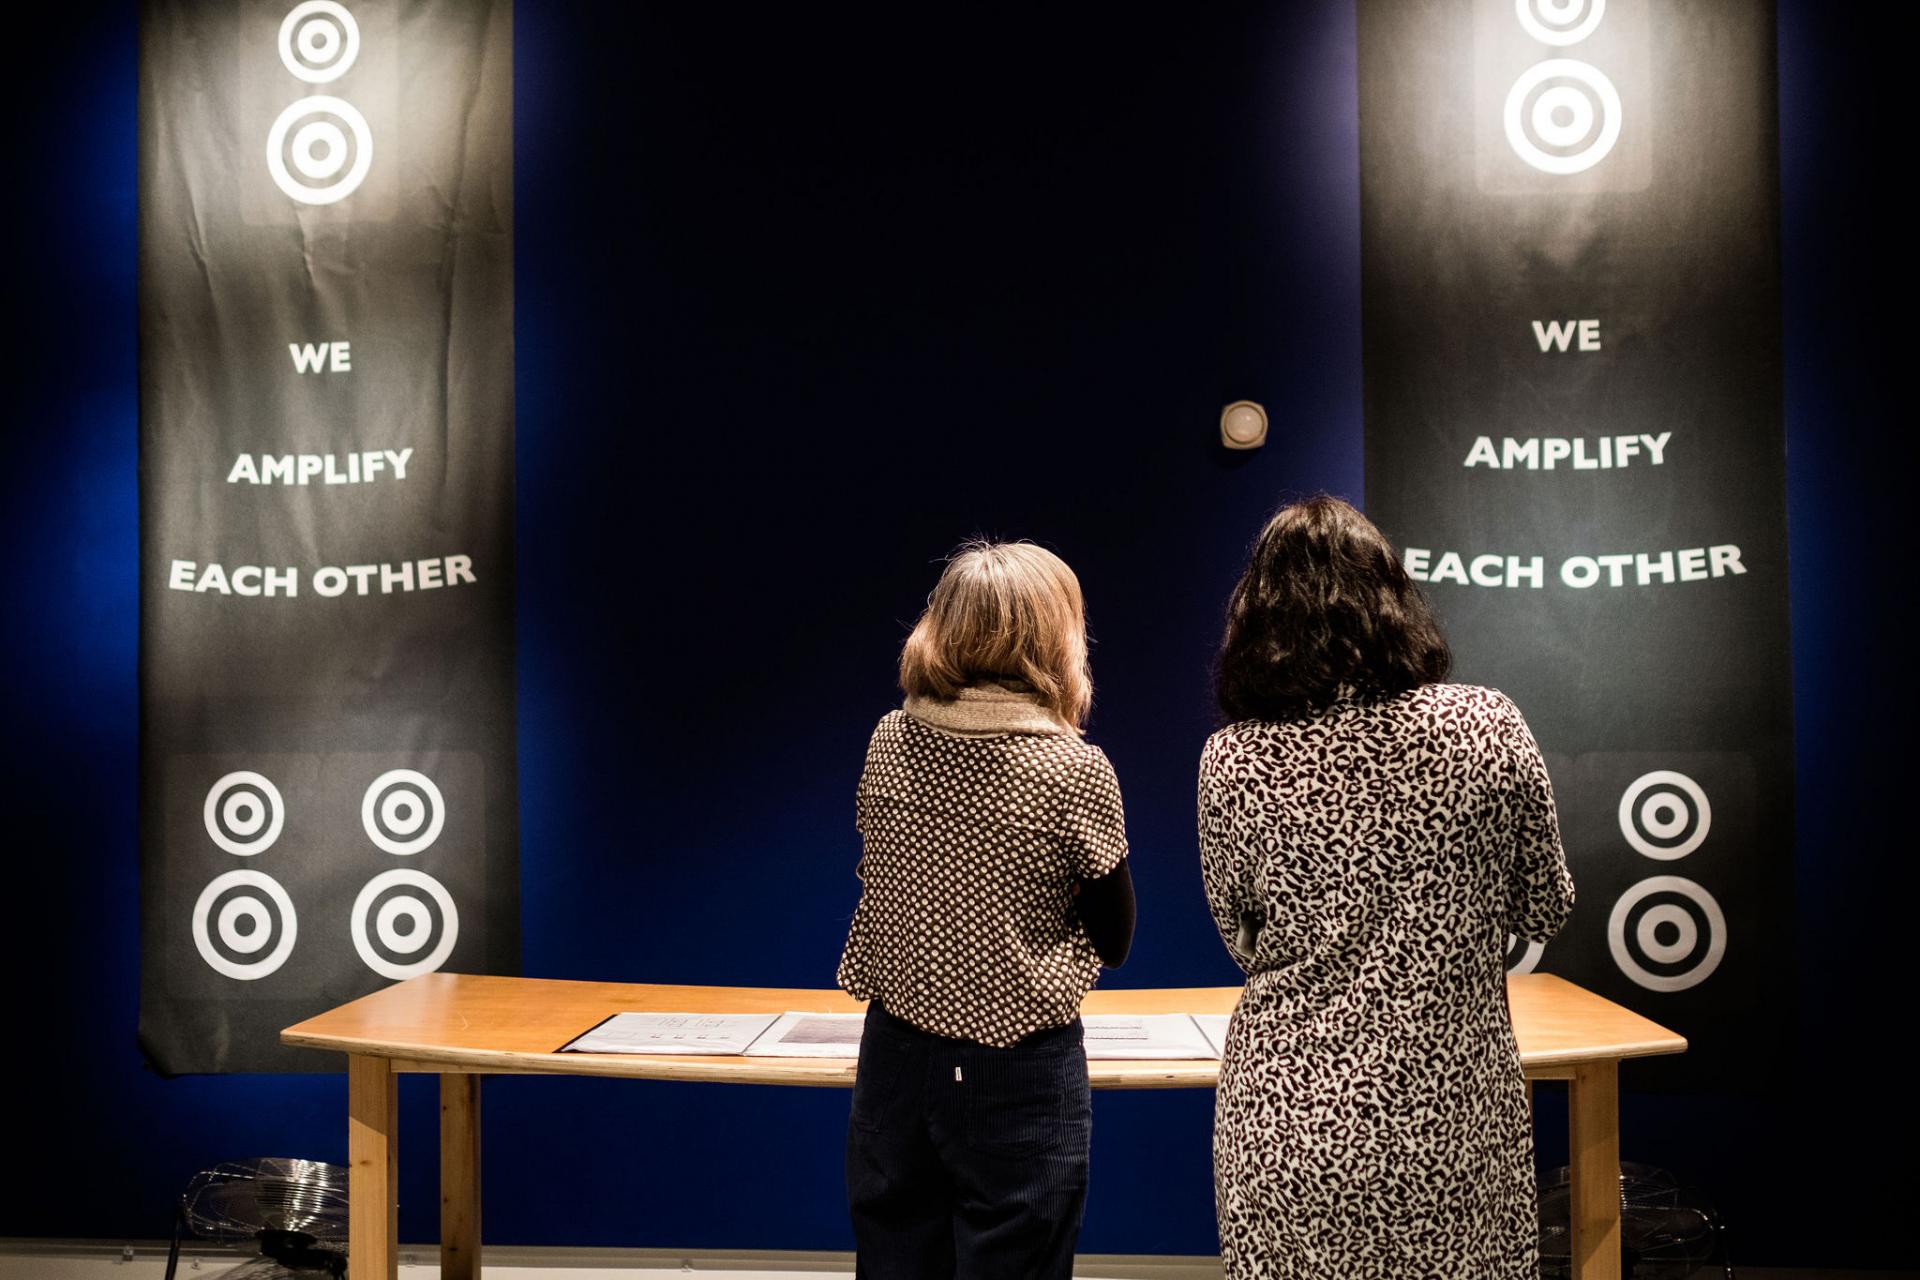 two women look at a banner with the words 'we amplify each other' on it